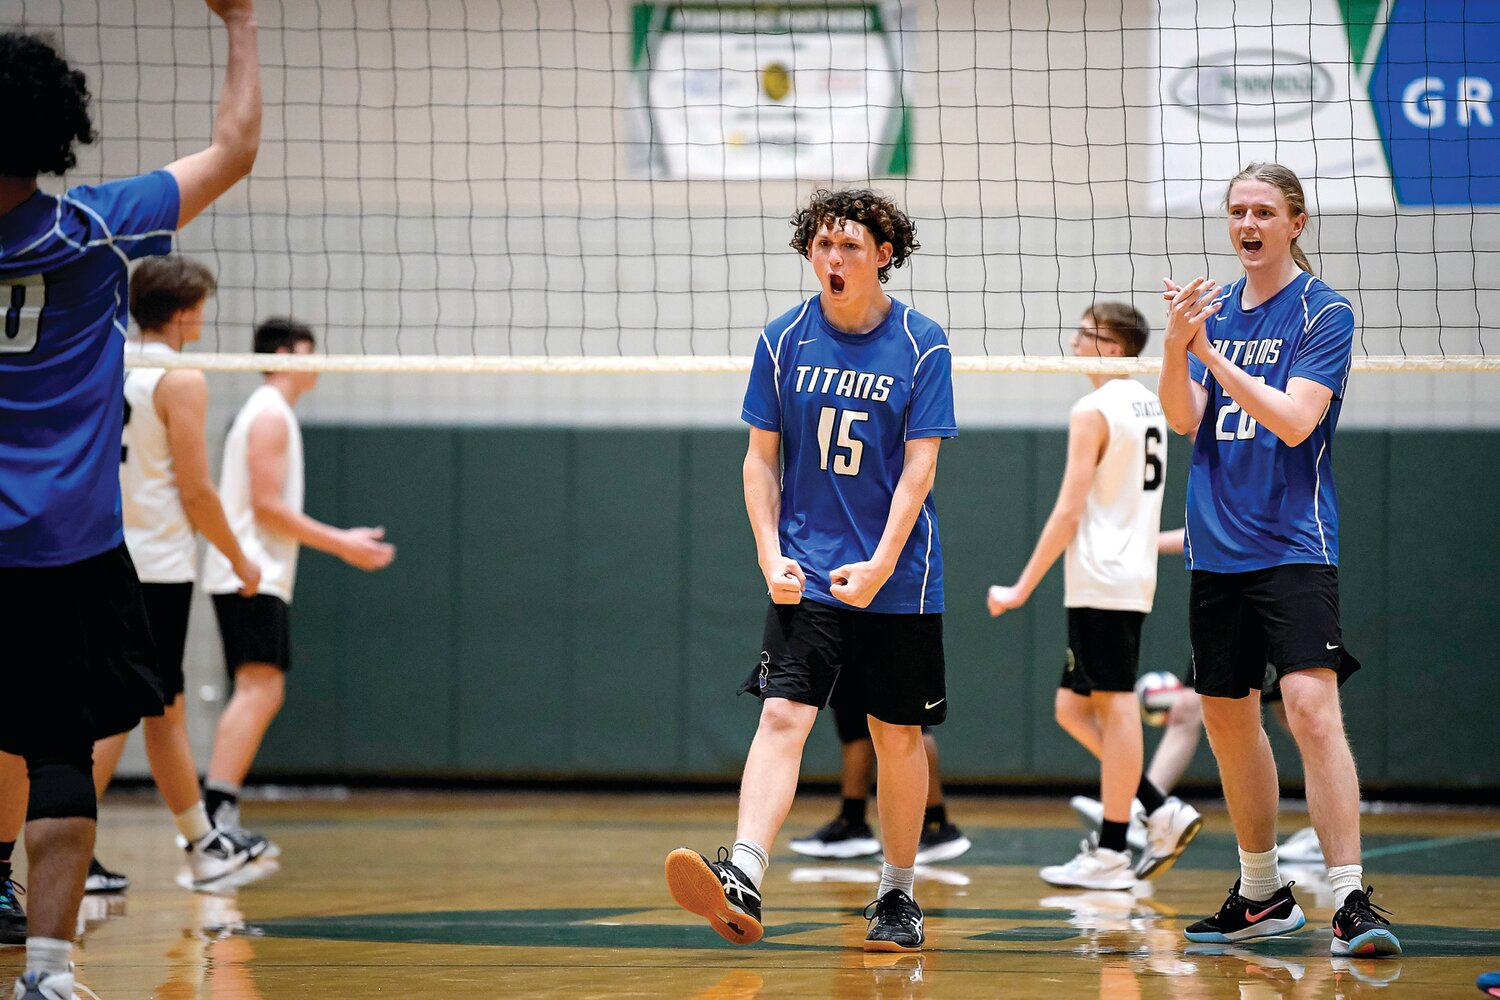 CB South’s Jon Infantino reacts after building a big lead early in the third set.